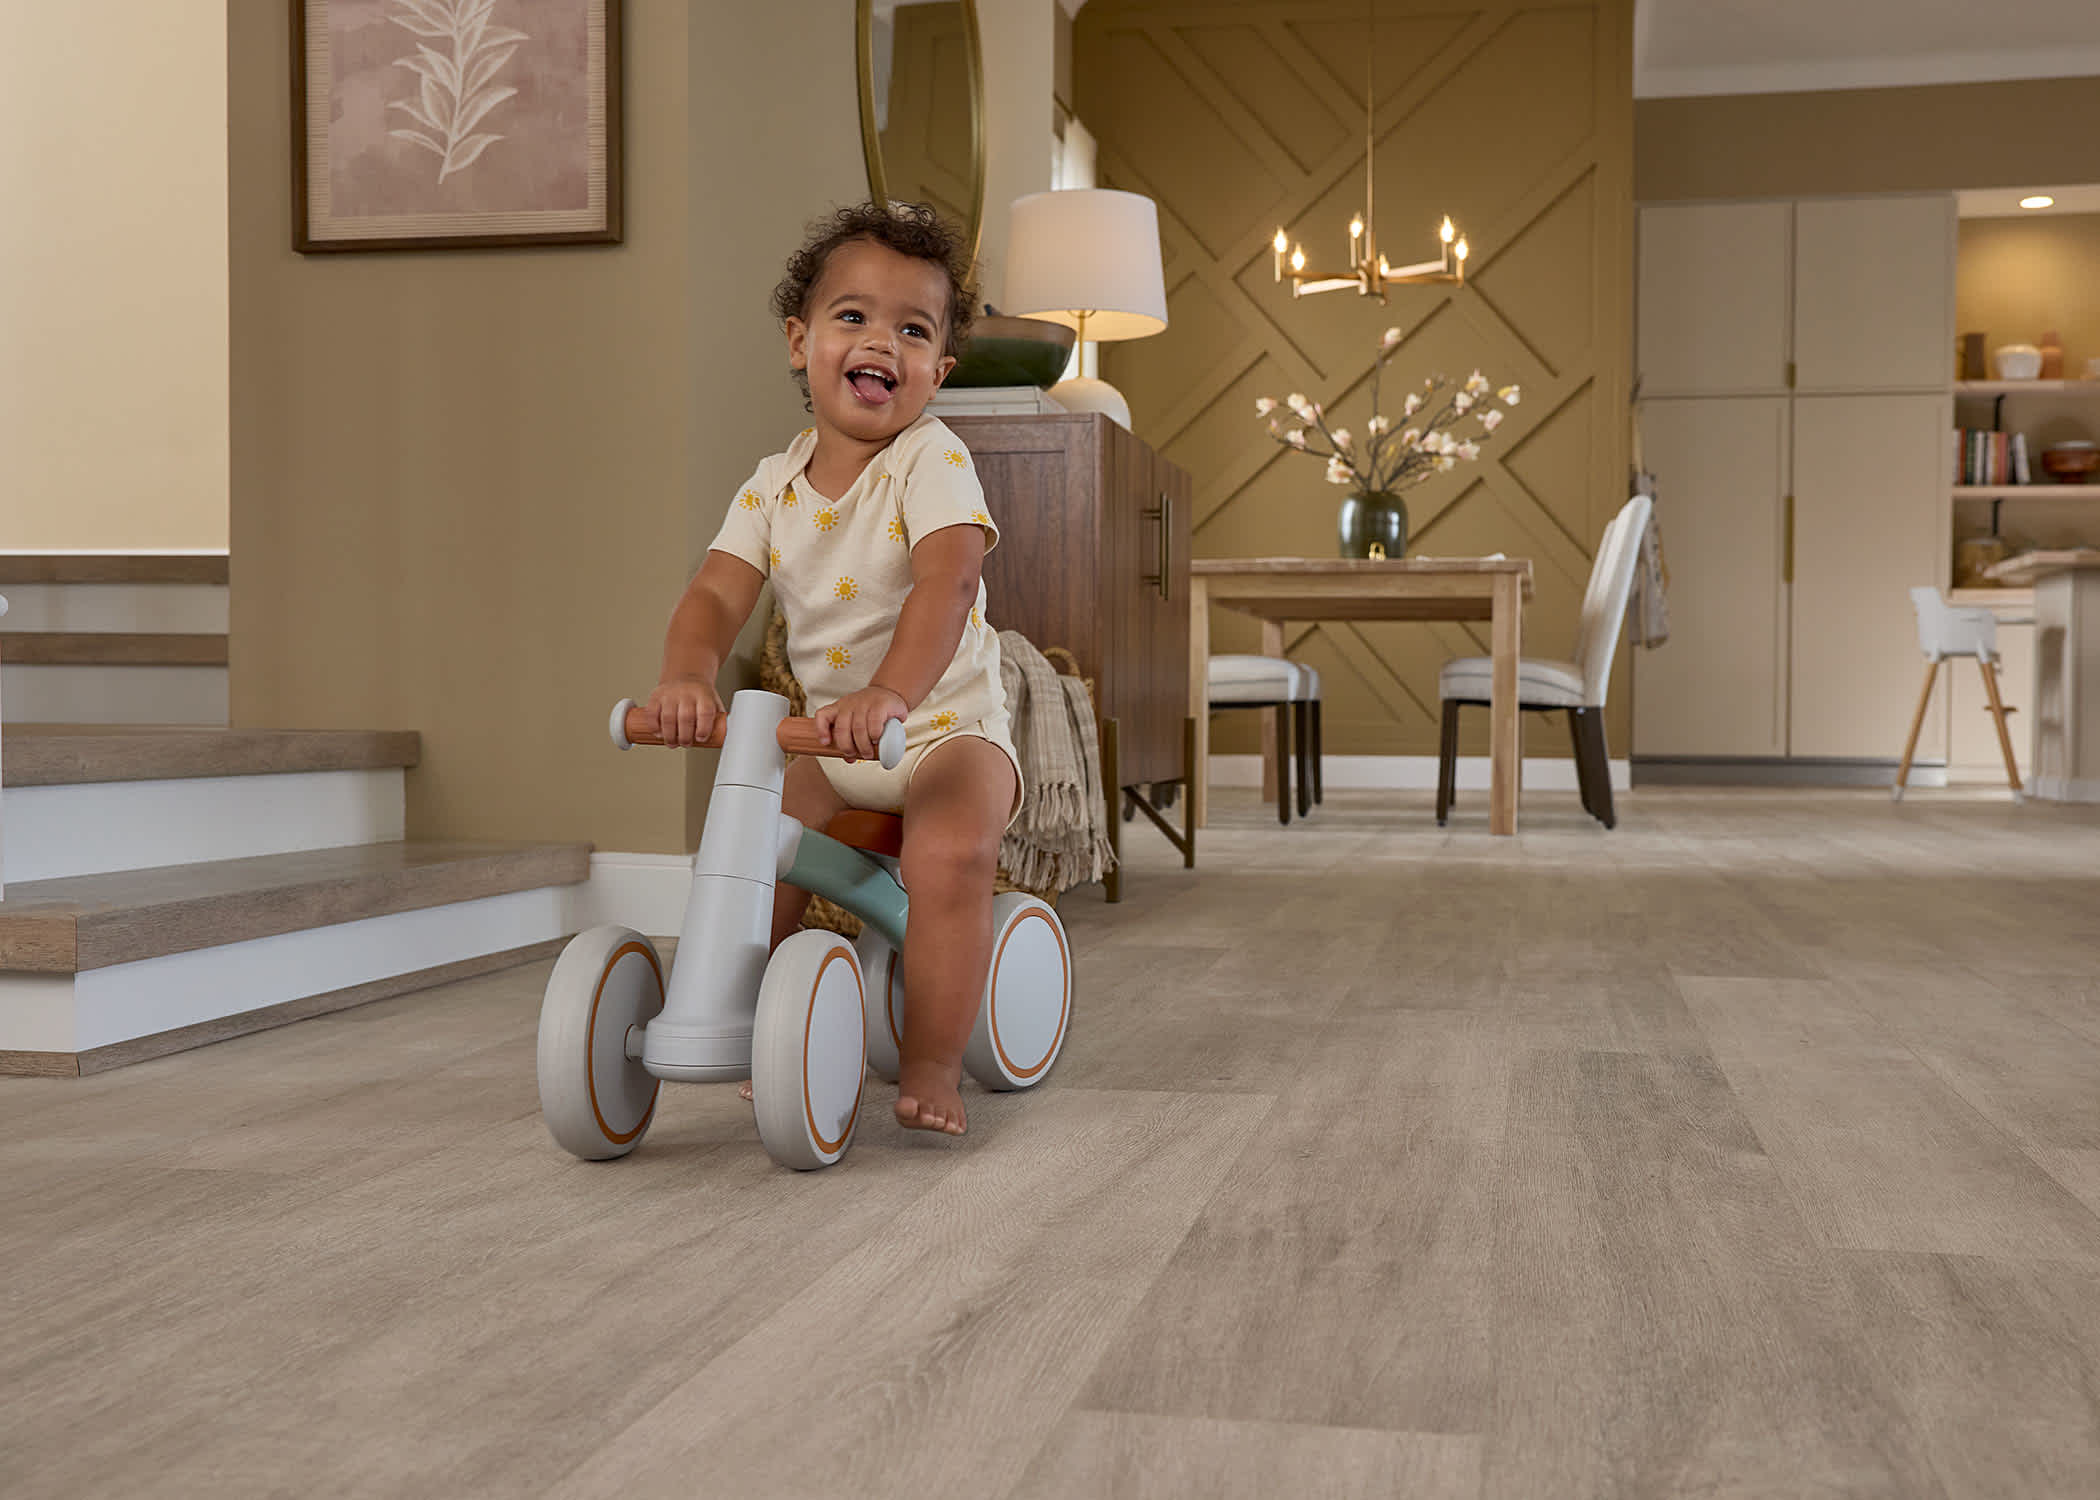 beige waterproof rigid vinyl plank floor in open concept living and dining room with baby riding on tricycle next to stairs with dining area in background